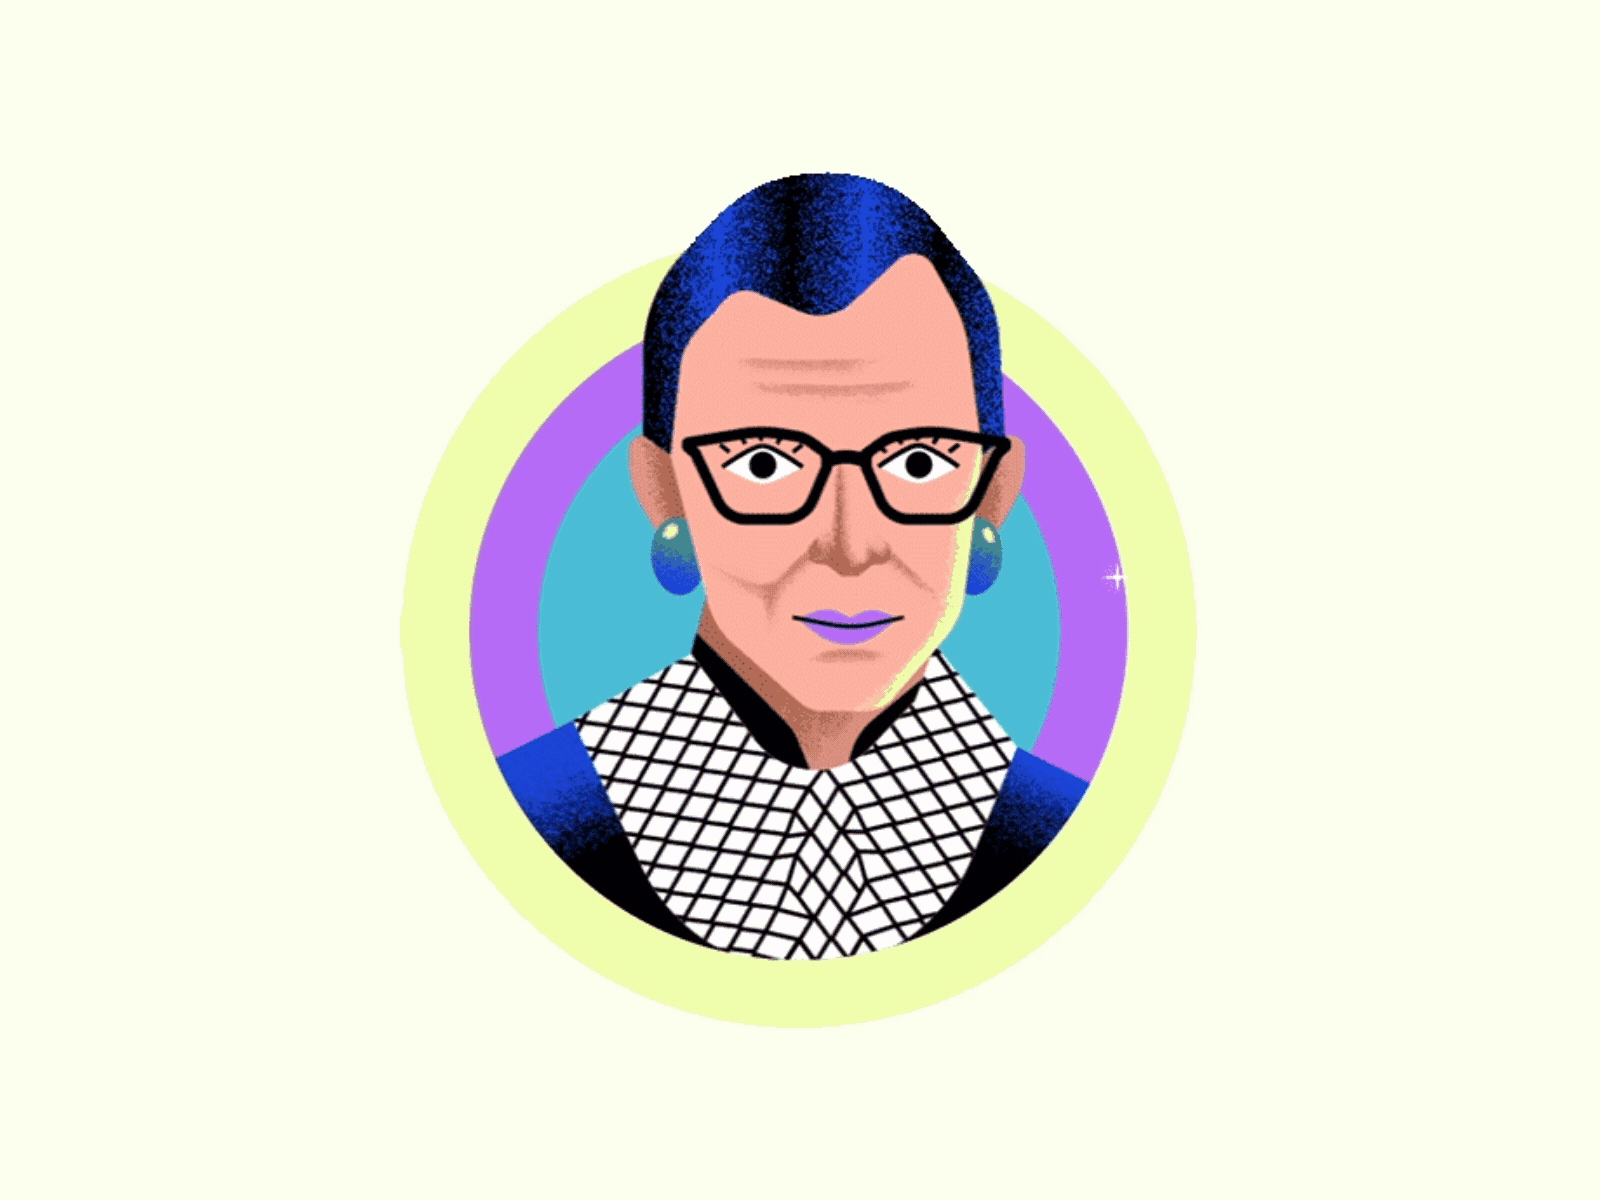 Women's History Month characterdesign gif giphy giphy sticker history illustration motion motion graphics rbg ruth bader ginsburg stickerdesign woman illustration women empowerment womens day